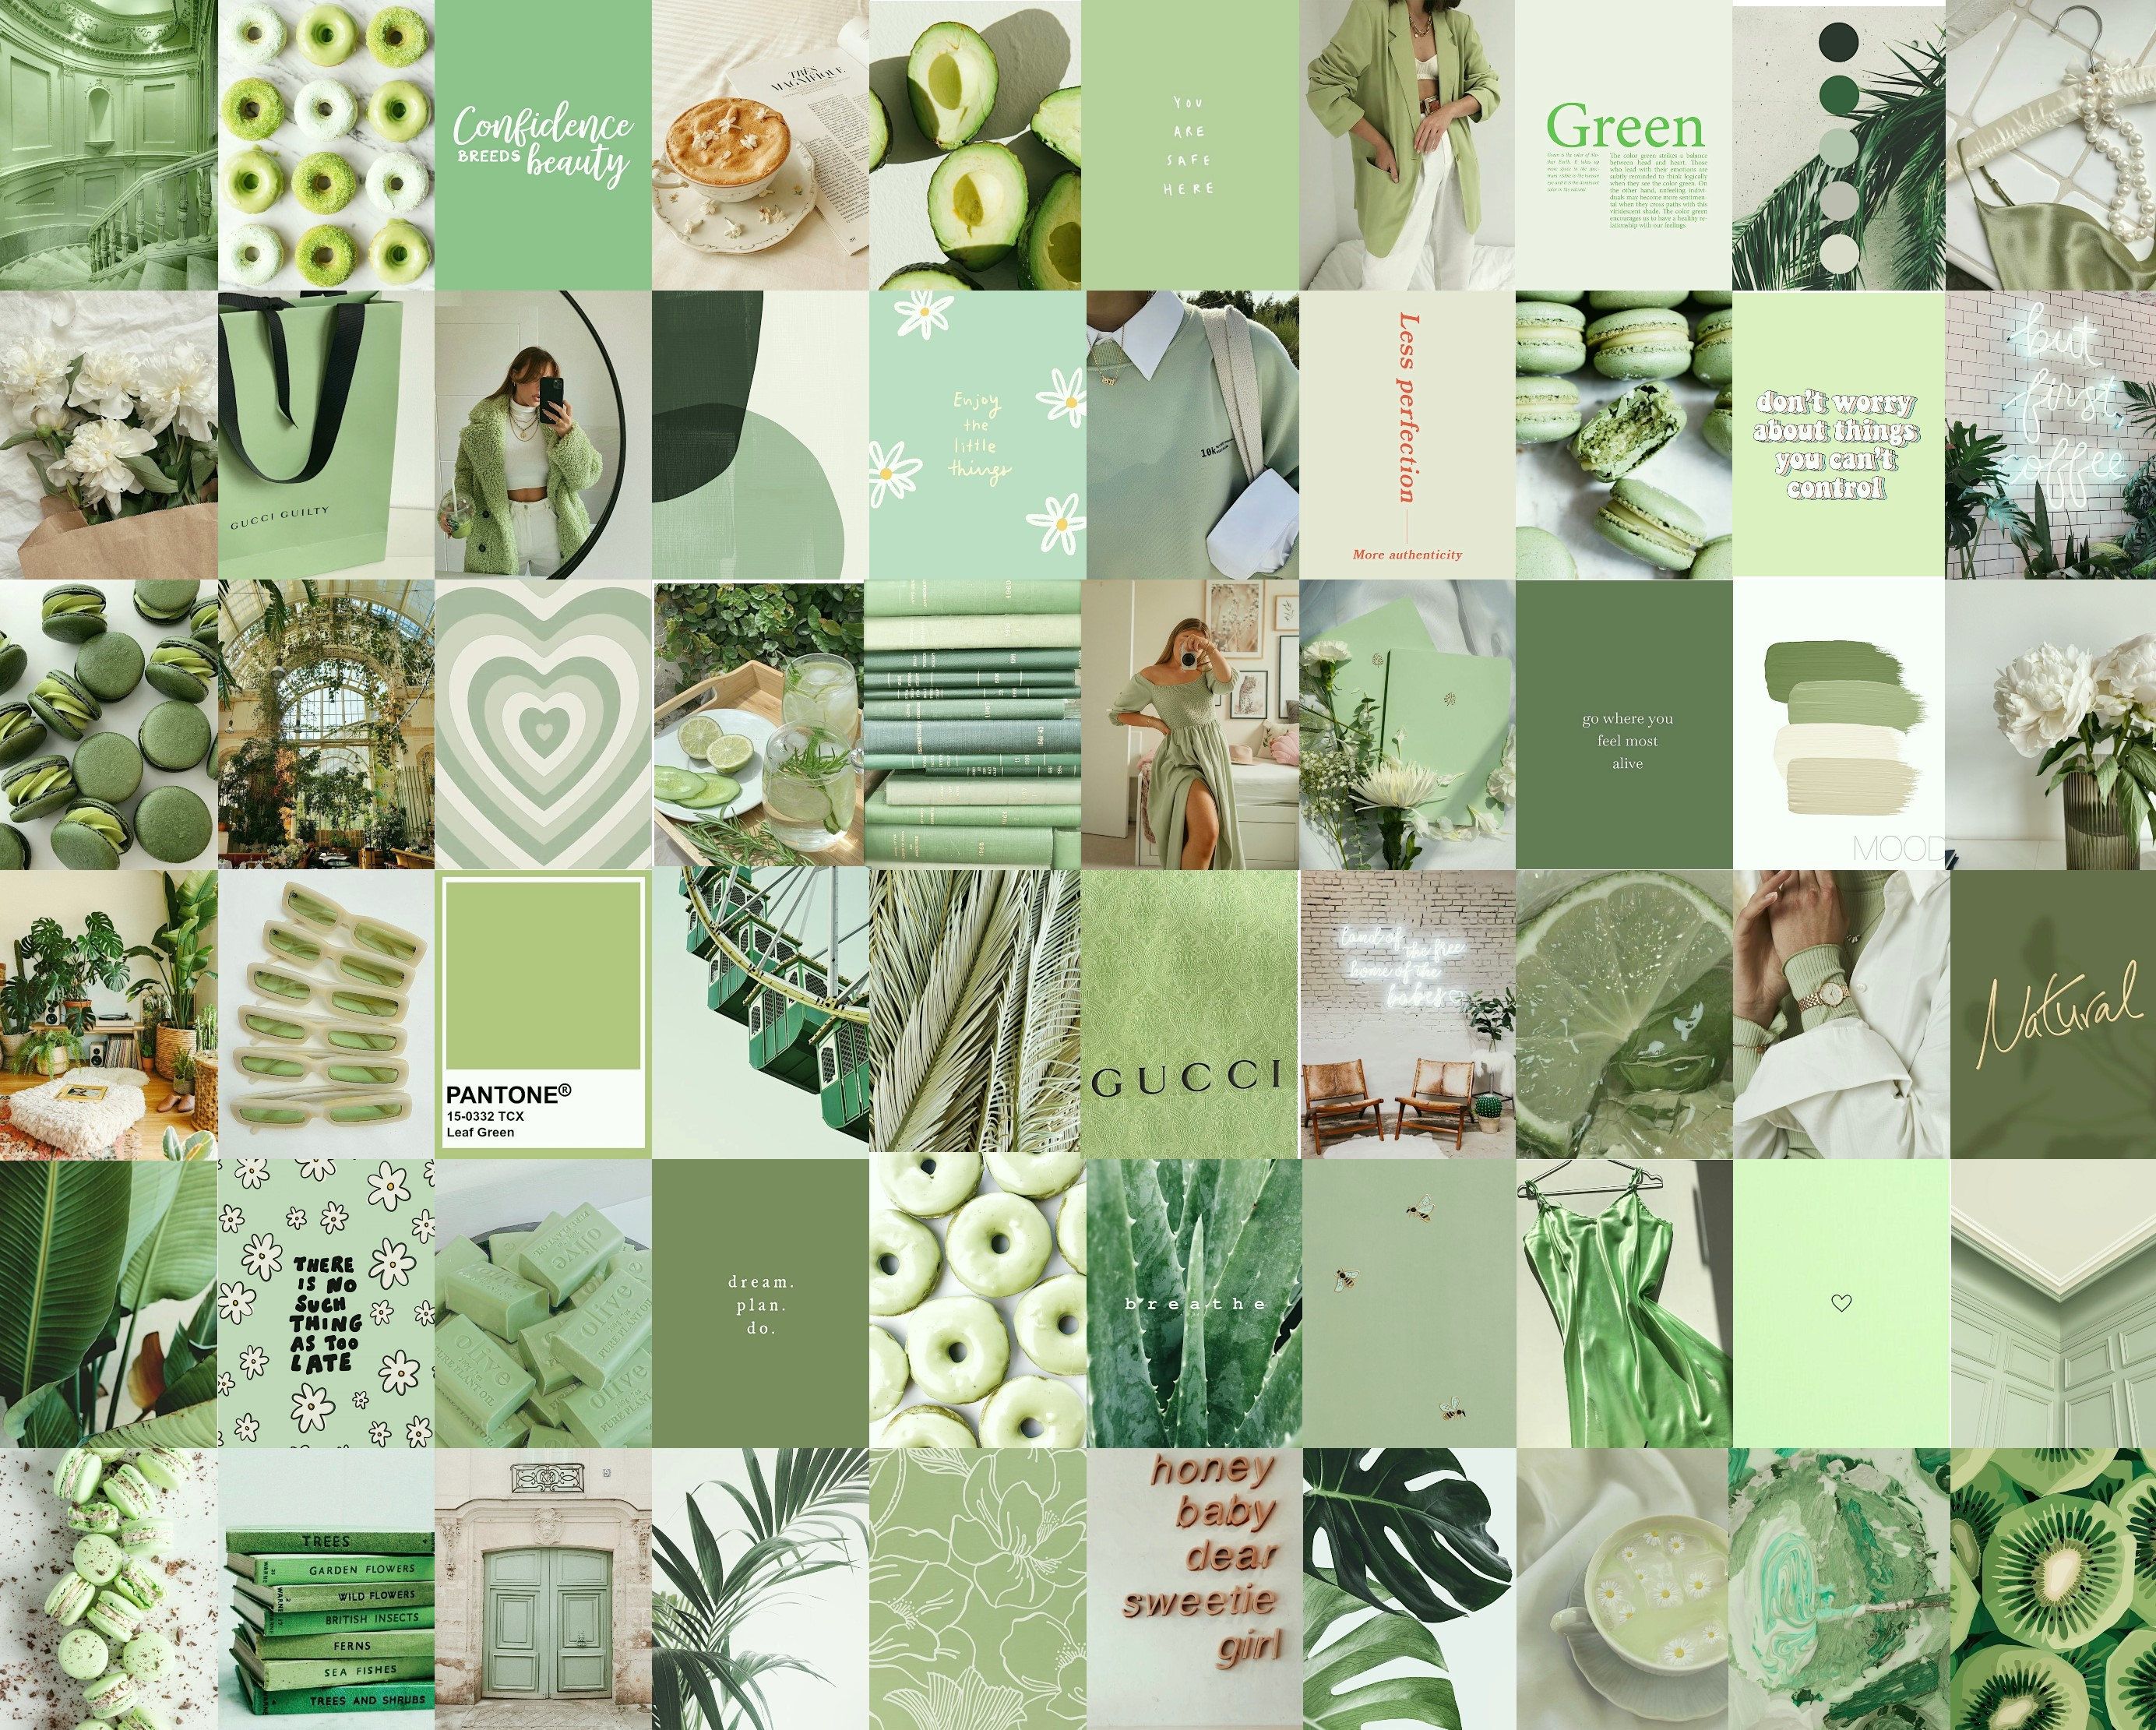 A collage of photos in shades of green. - Sage green, green, mint green